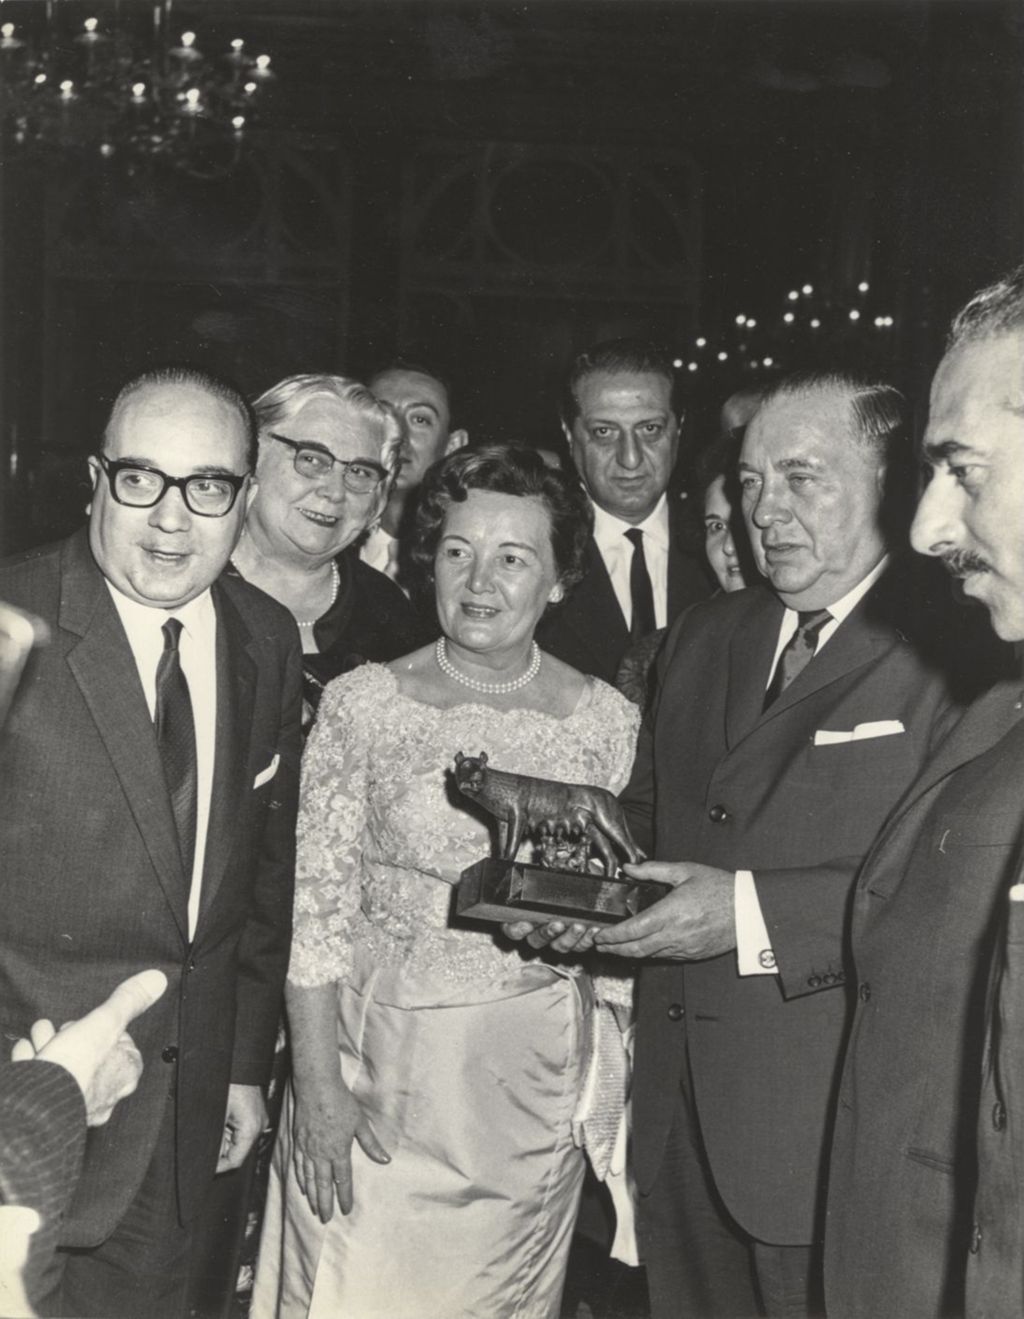 Richard J. Daley and Eleanor Daley receive gift at a reception in Rome